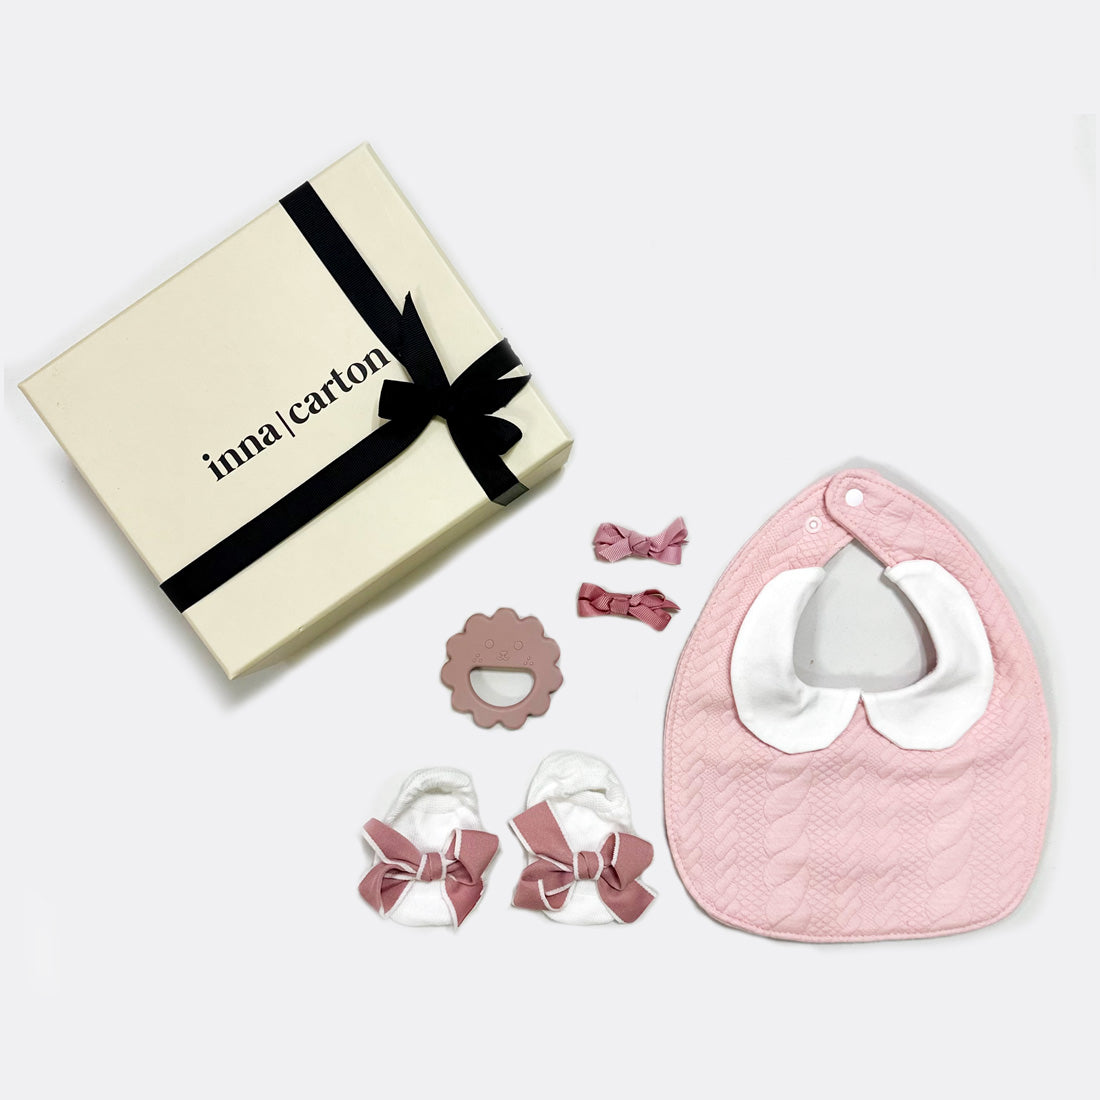 Collar Bib | Pink 2 Bow Hair Clip | Pastel Pink Flower Teether Bow Socks | Pink Suitable (from 0-9 months) , shop the best Christmas gift gifts for her for him from Inna carton online store dubai, UAE!